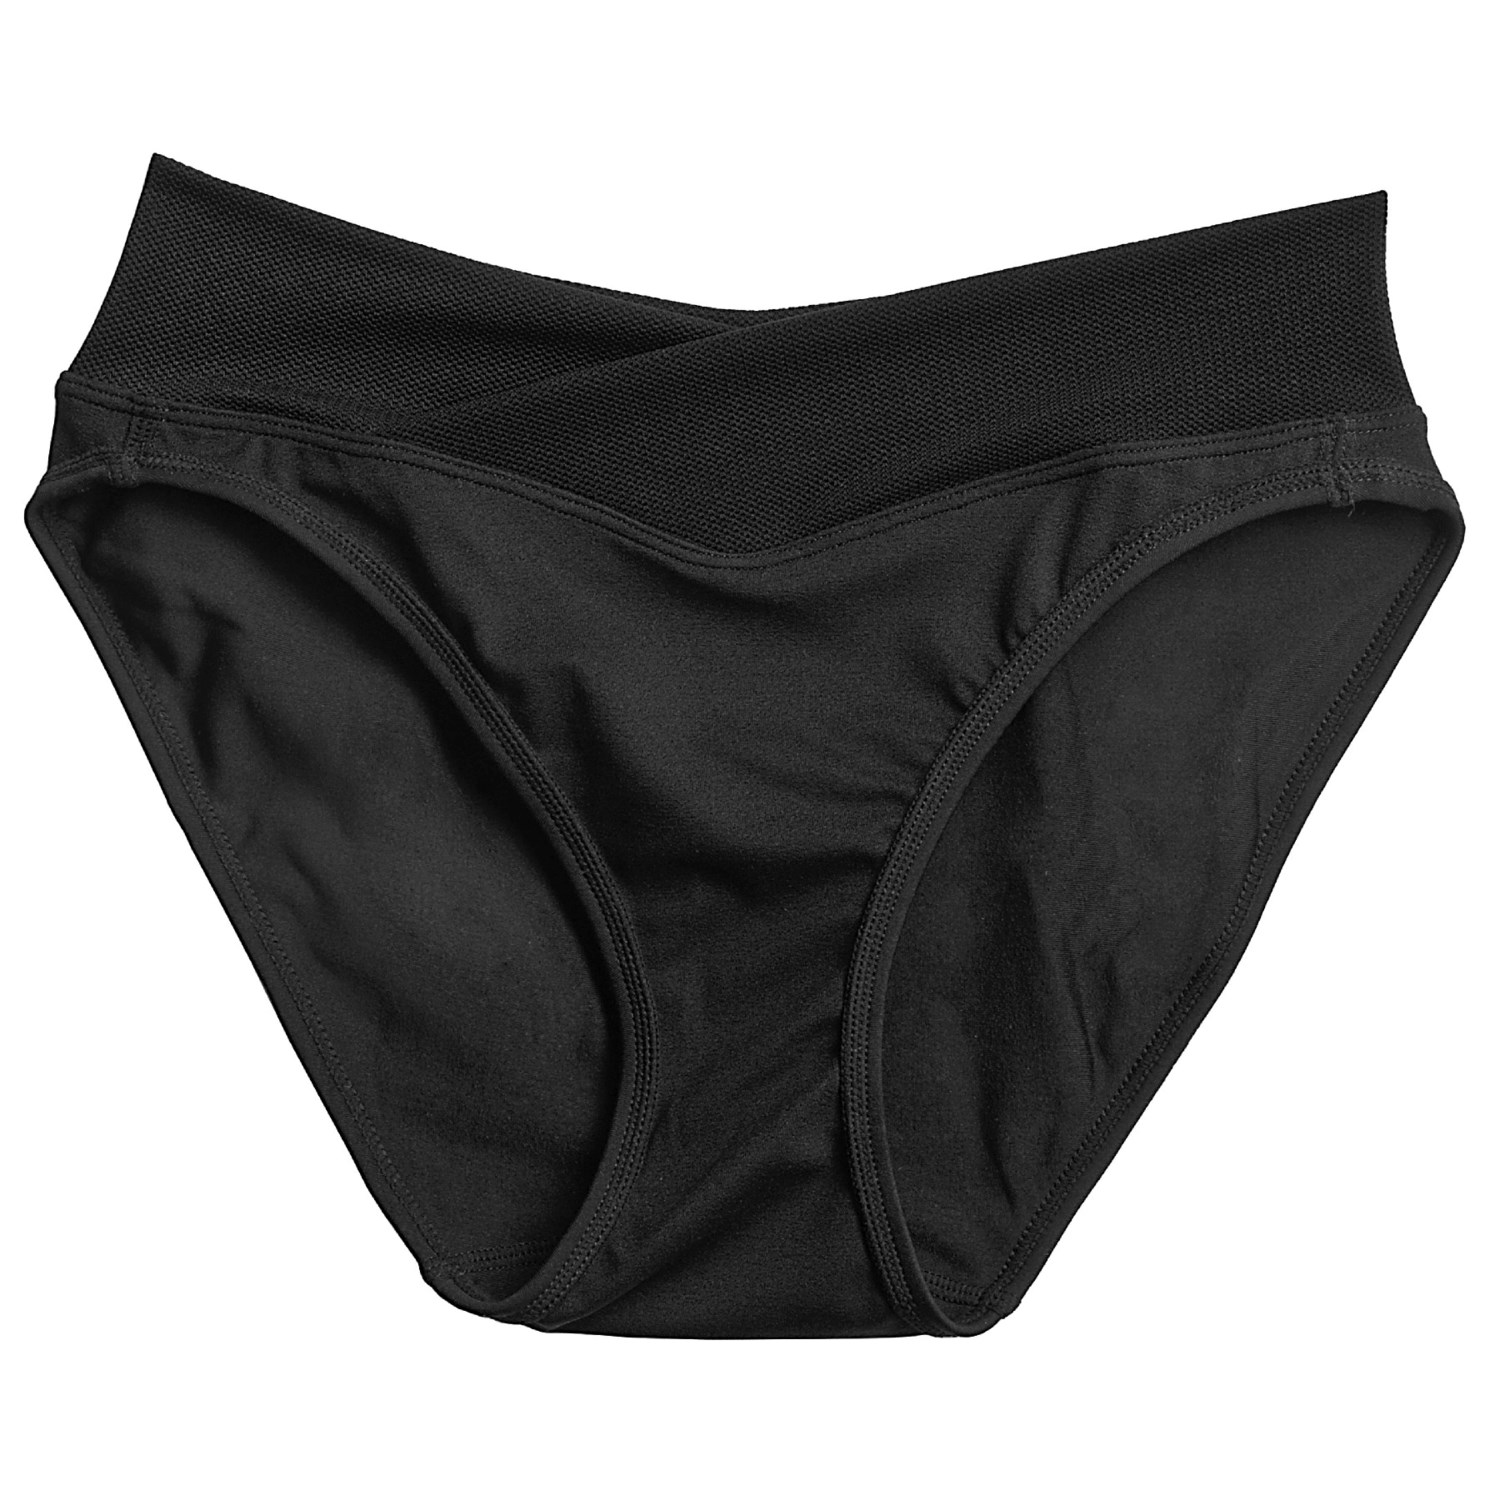 Skirt Sports Spanky Bottoms (For Women) 1224P - Save 50%